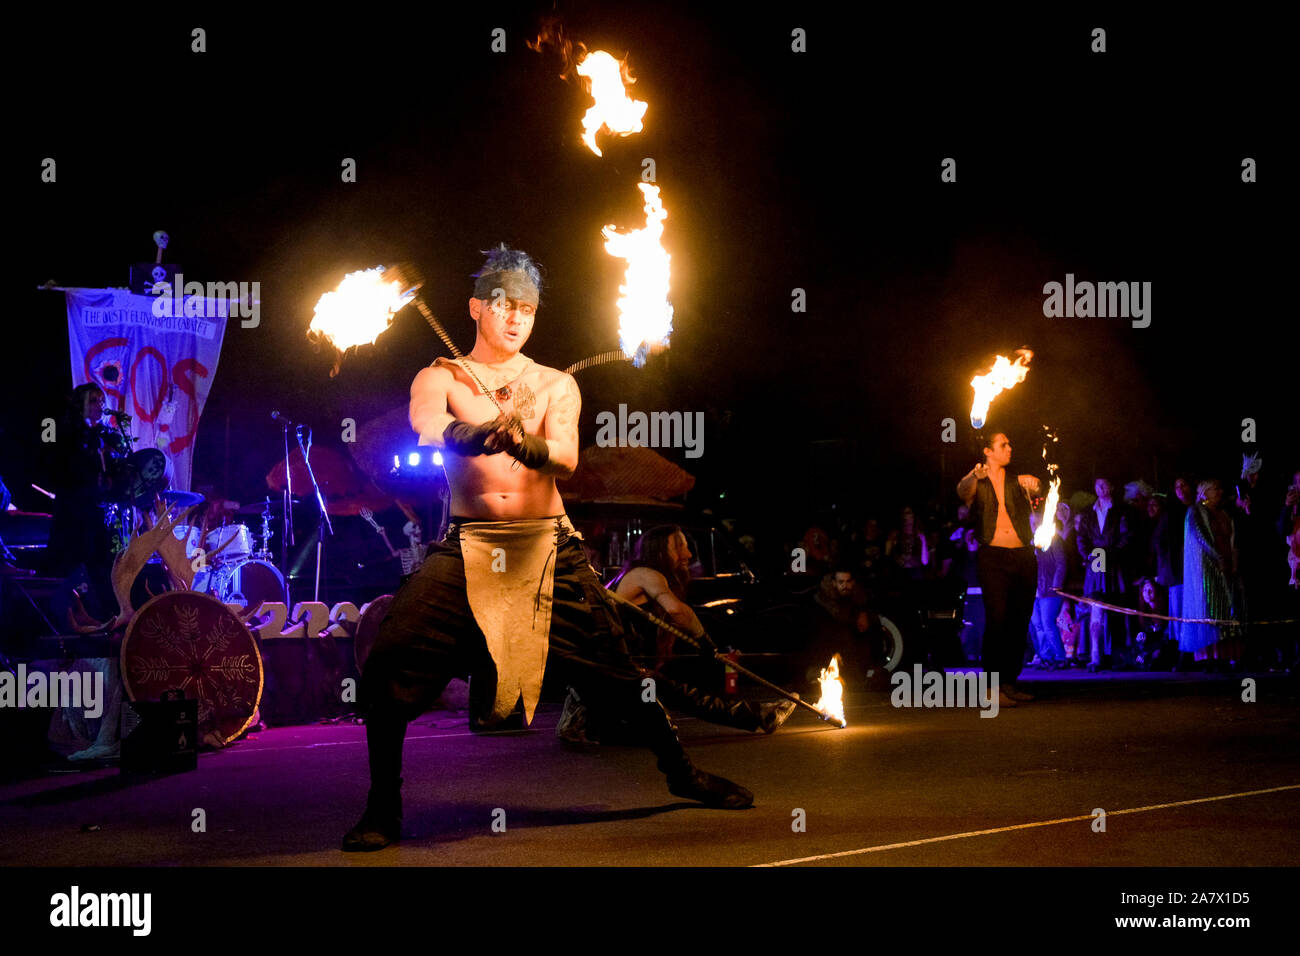 Parade of Lost Souls, Fire show, Vancouver, British Columbia, Canada Foto Stock